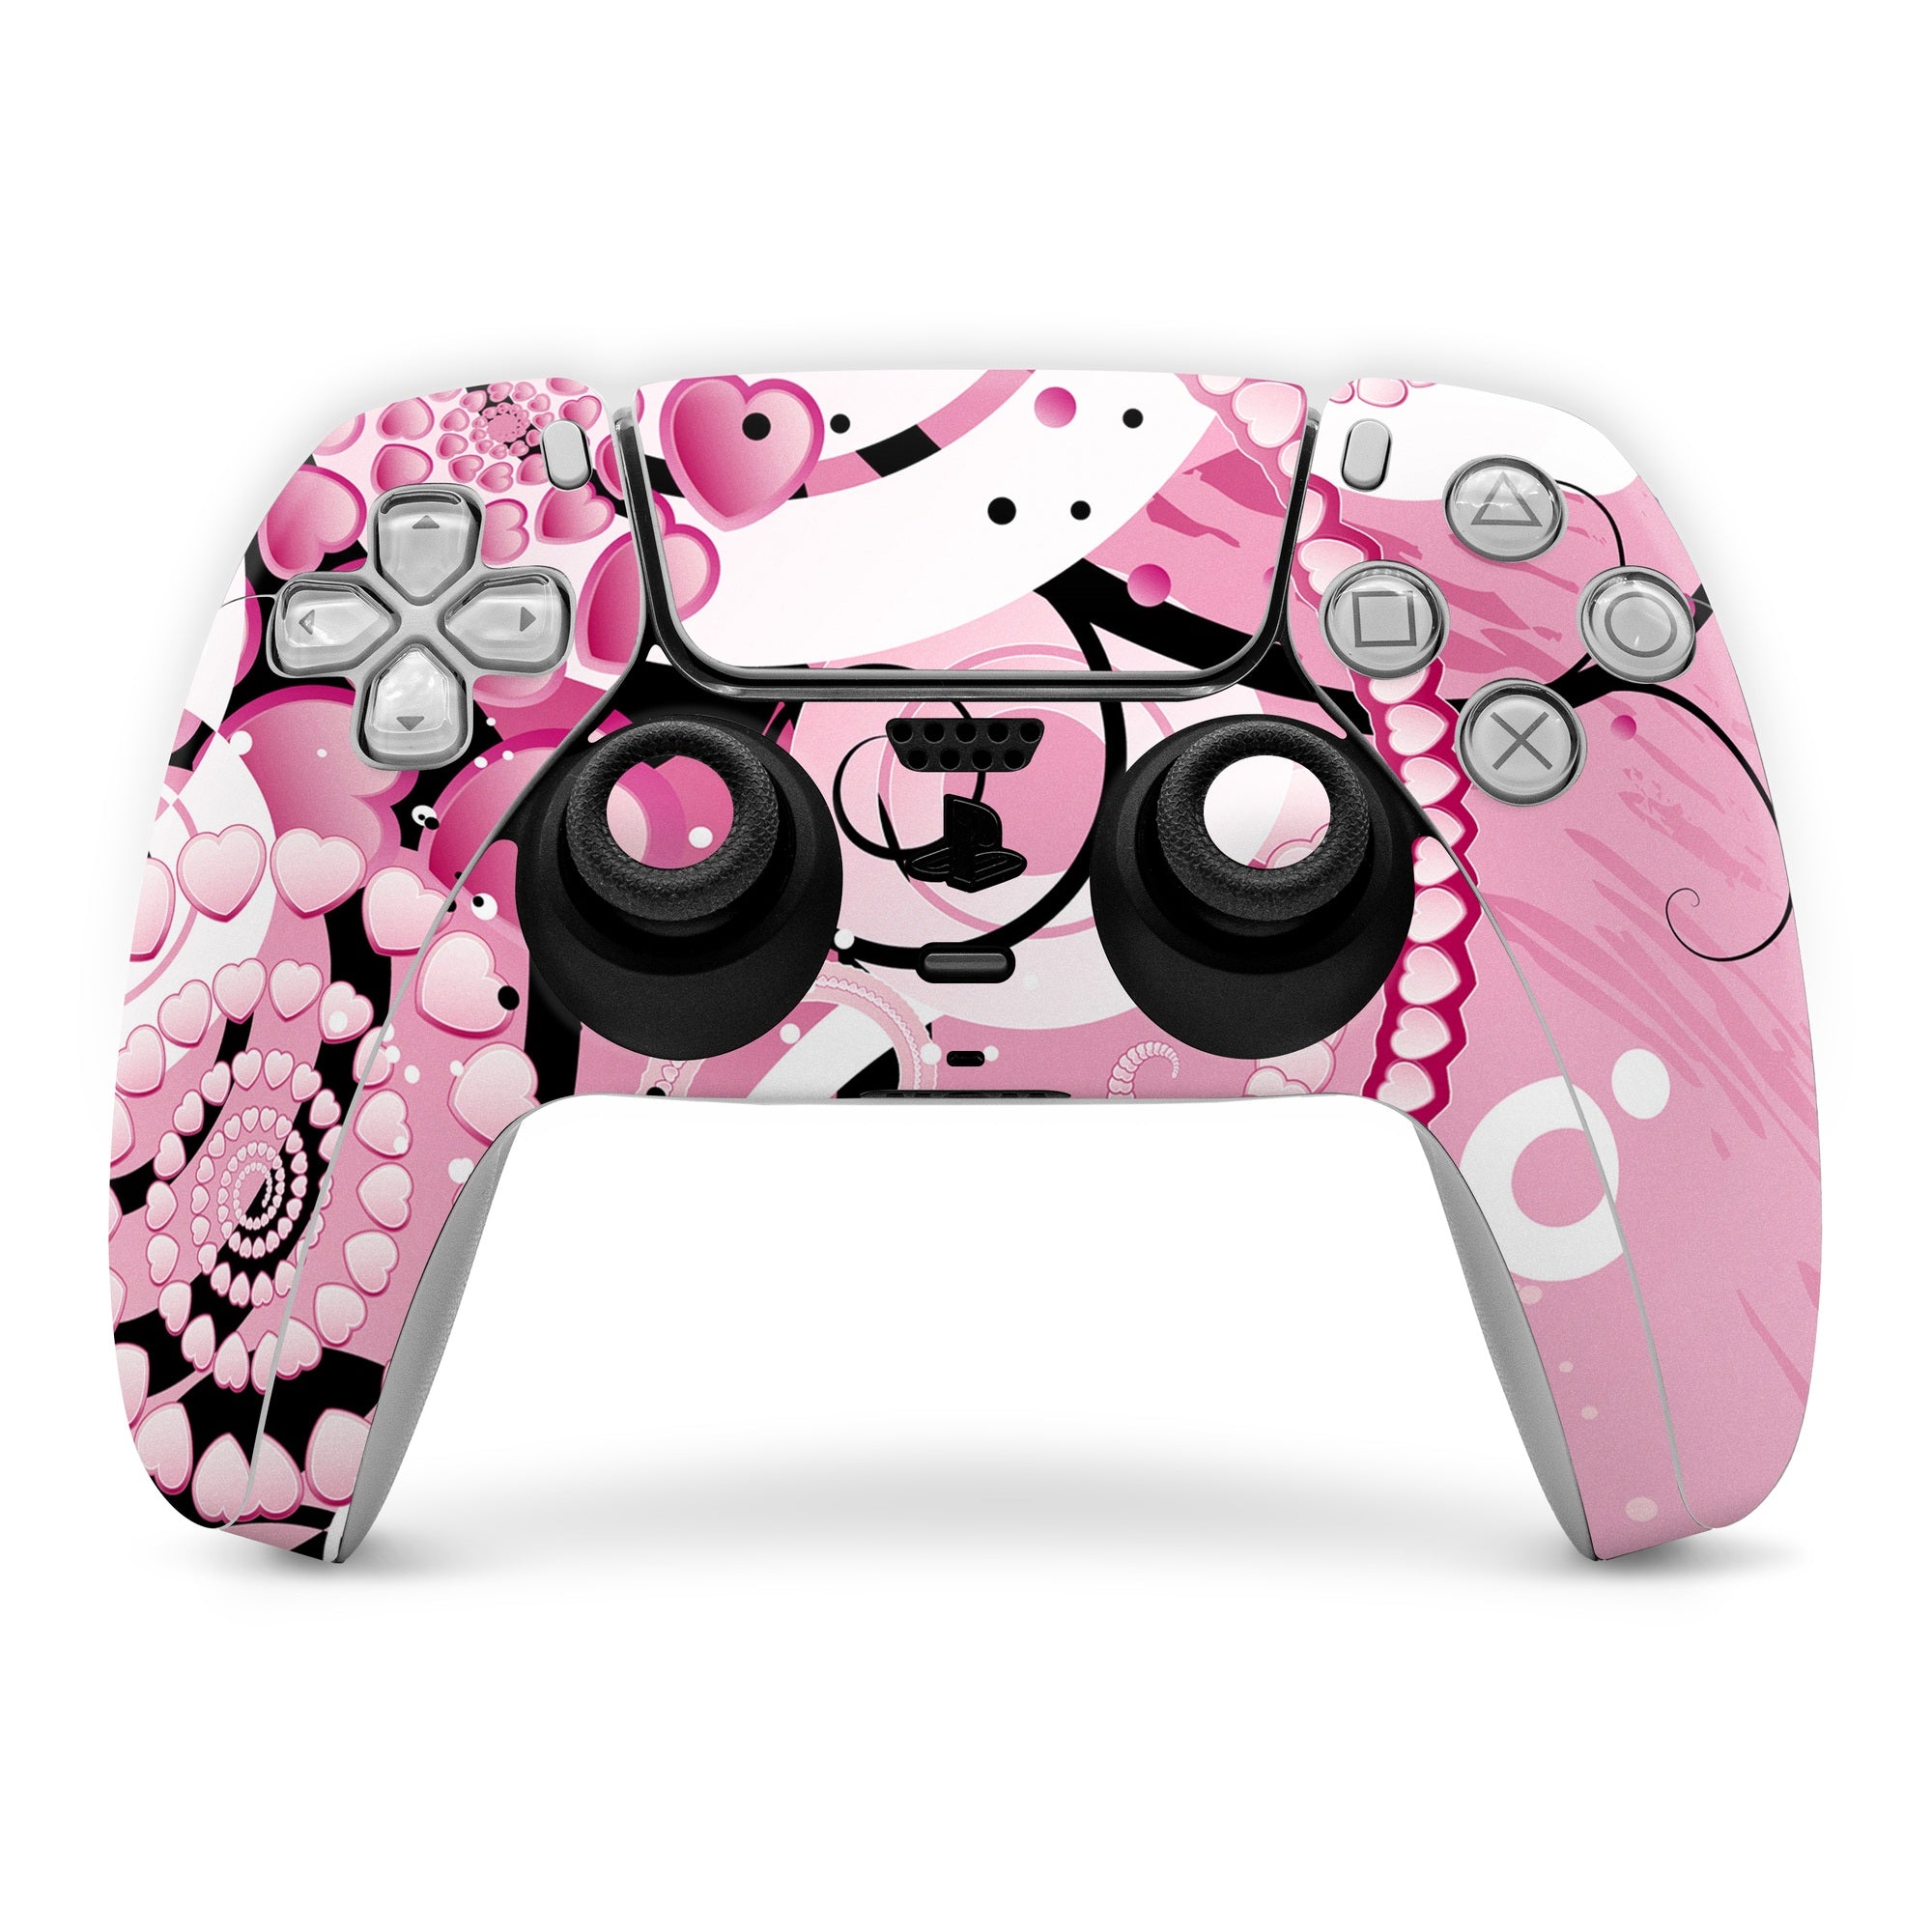 Her Abstraction - Sony PS5 Controller Skin